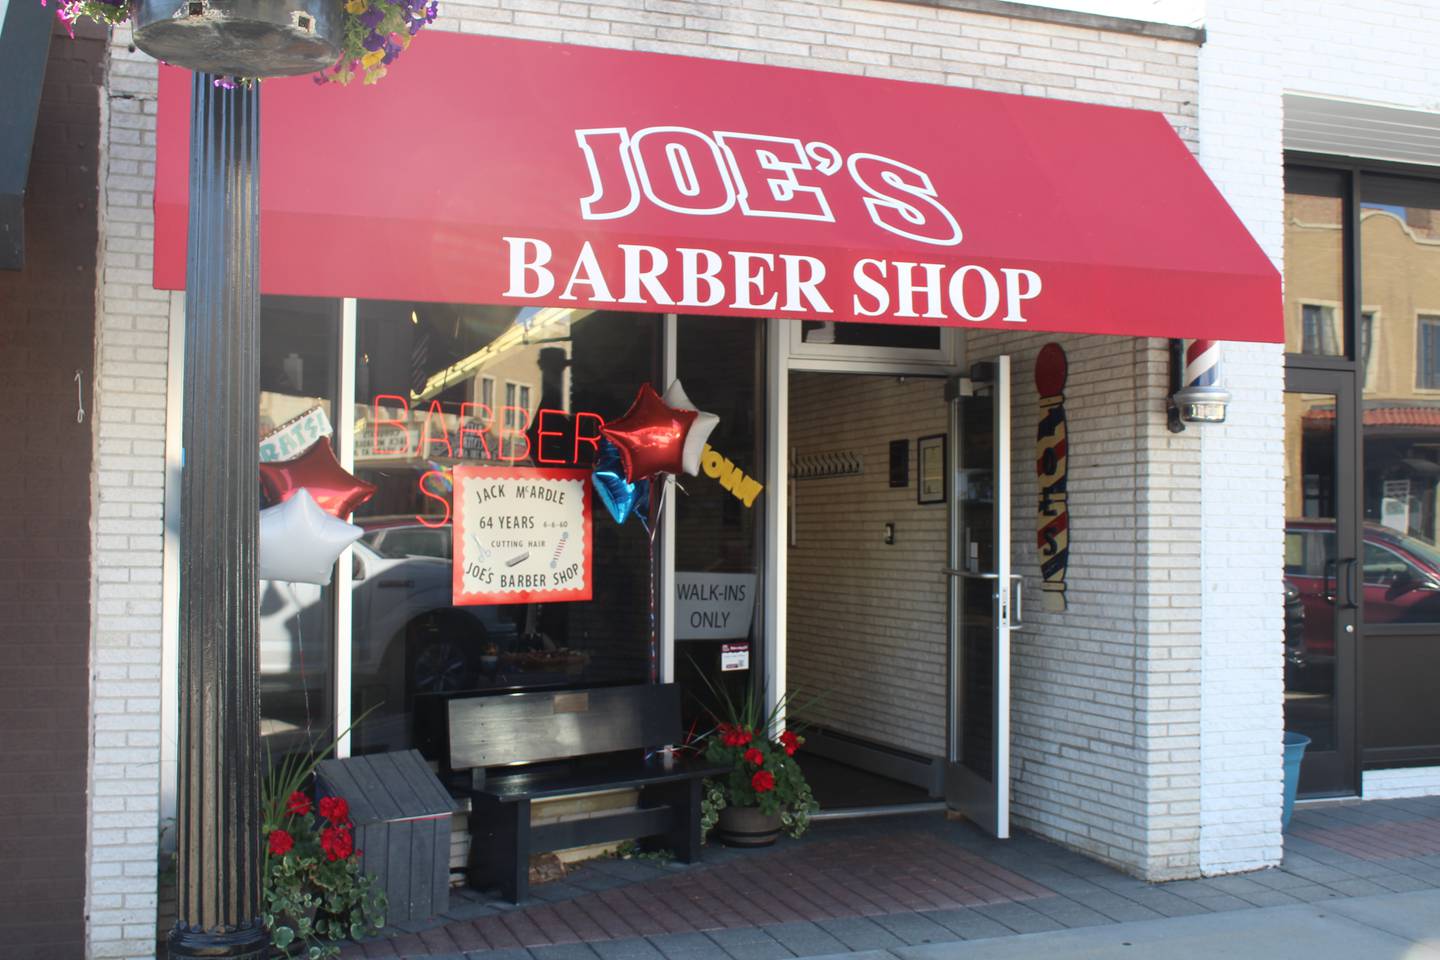 Joe's Barber Shop, located at 29 N. Williams St., Crystal Lake, has been open since 1960.